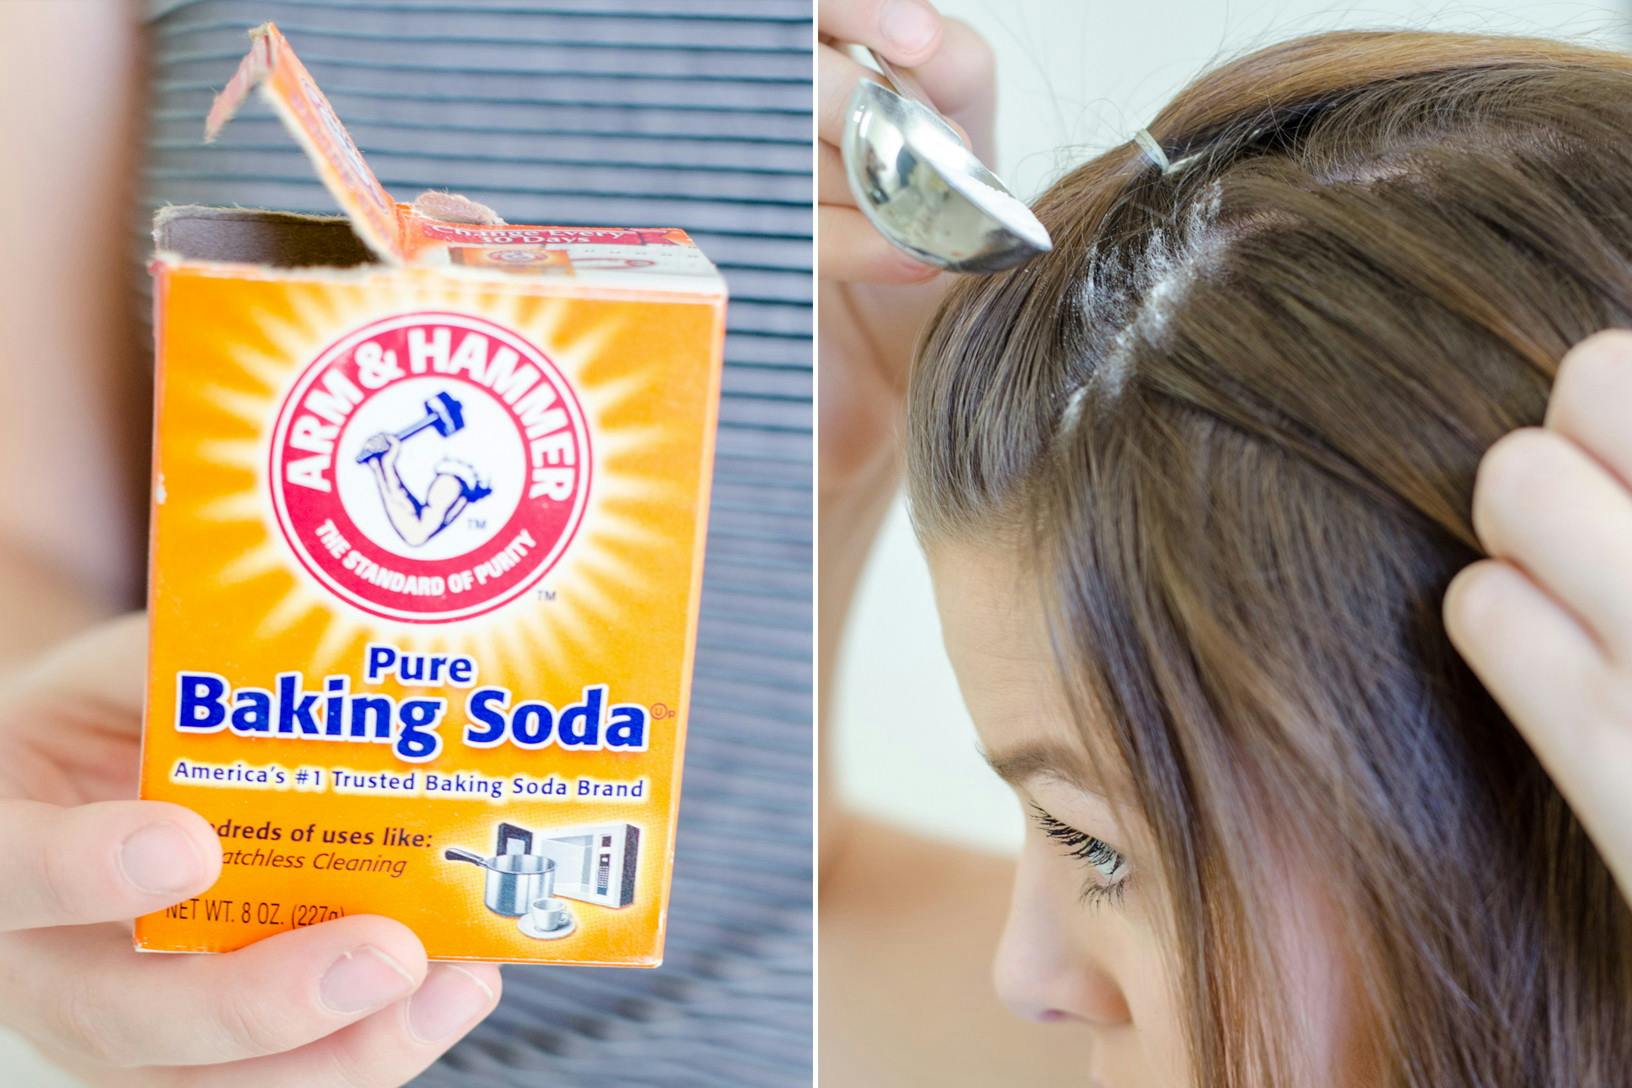 Replace your dry shampoo with baking soda when you're in a pinch.